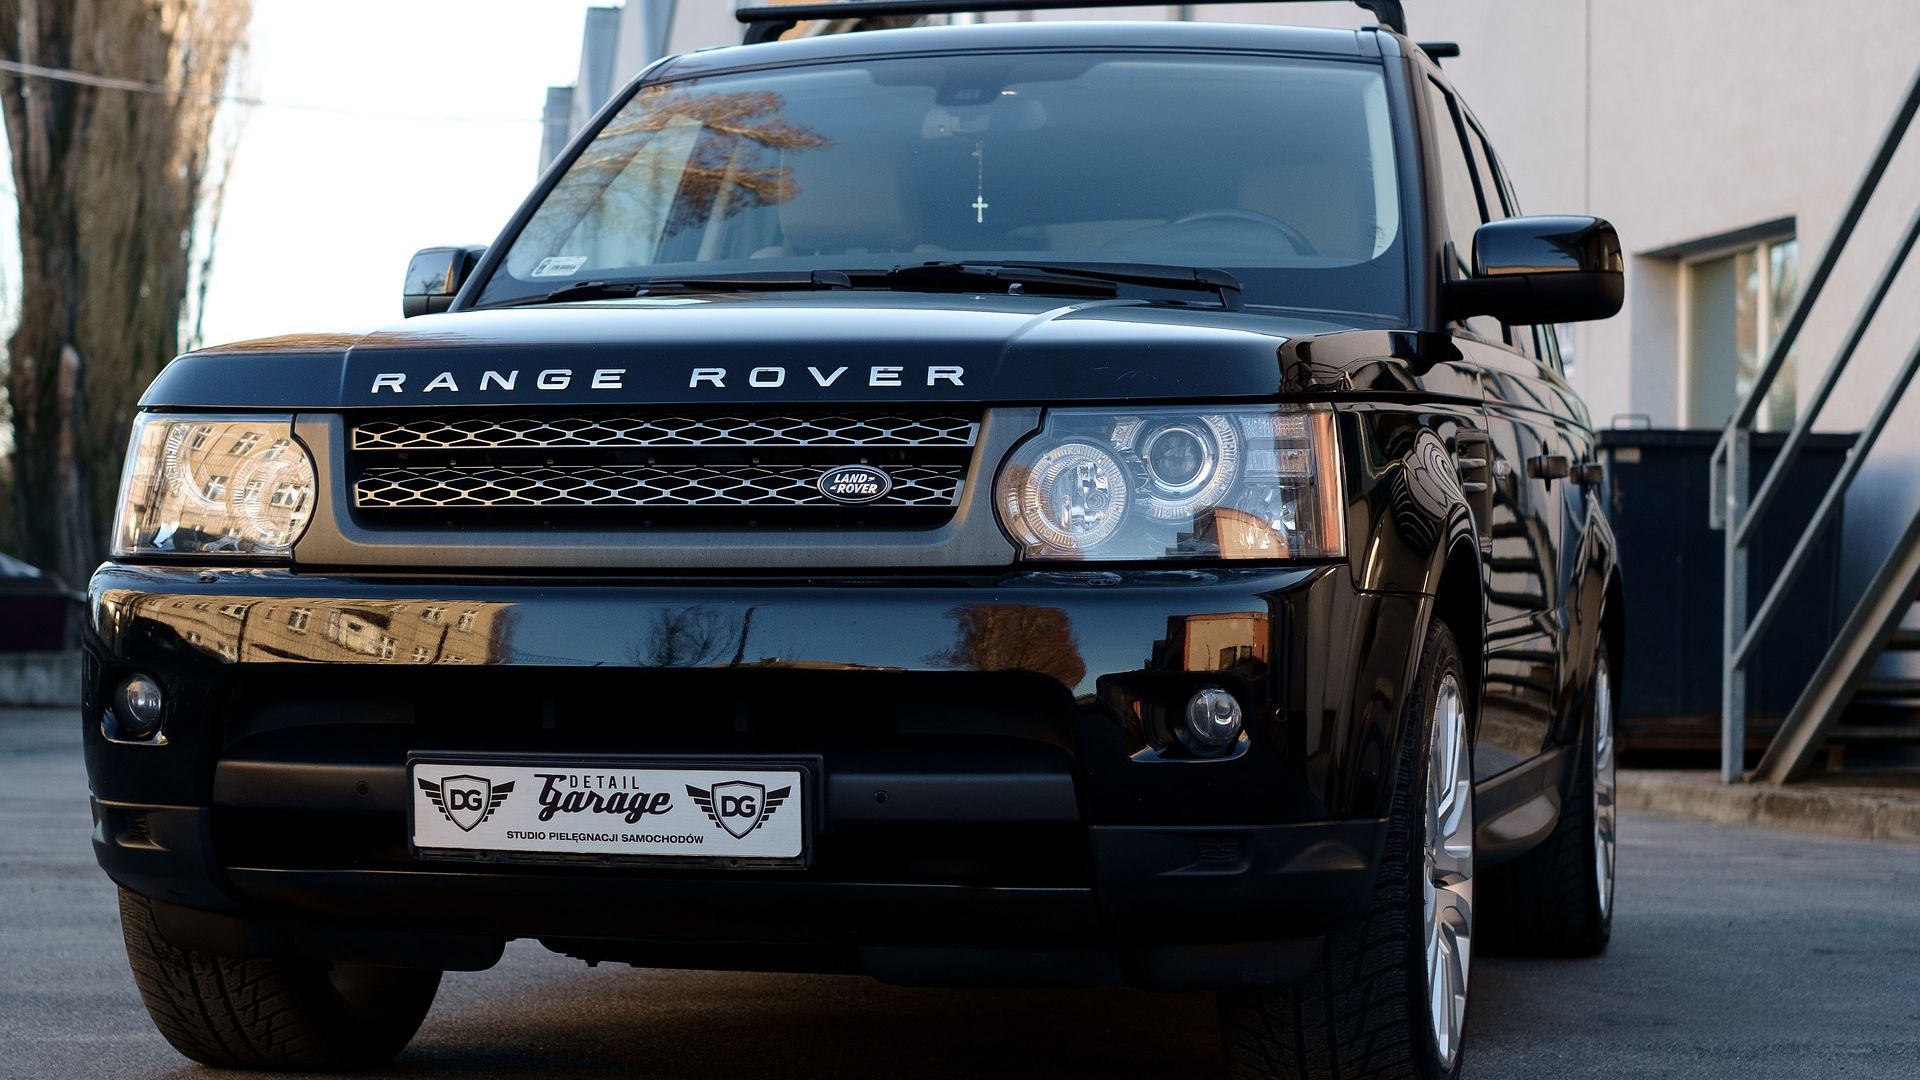 Wallpaper Range Rover, SUV, luxury car, front view